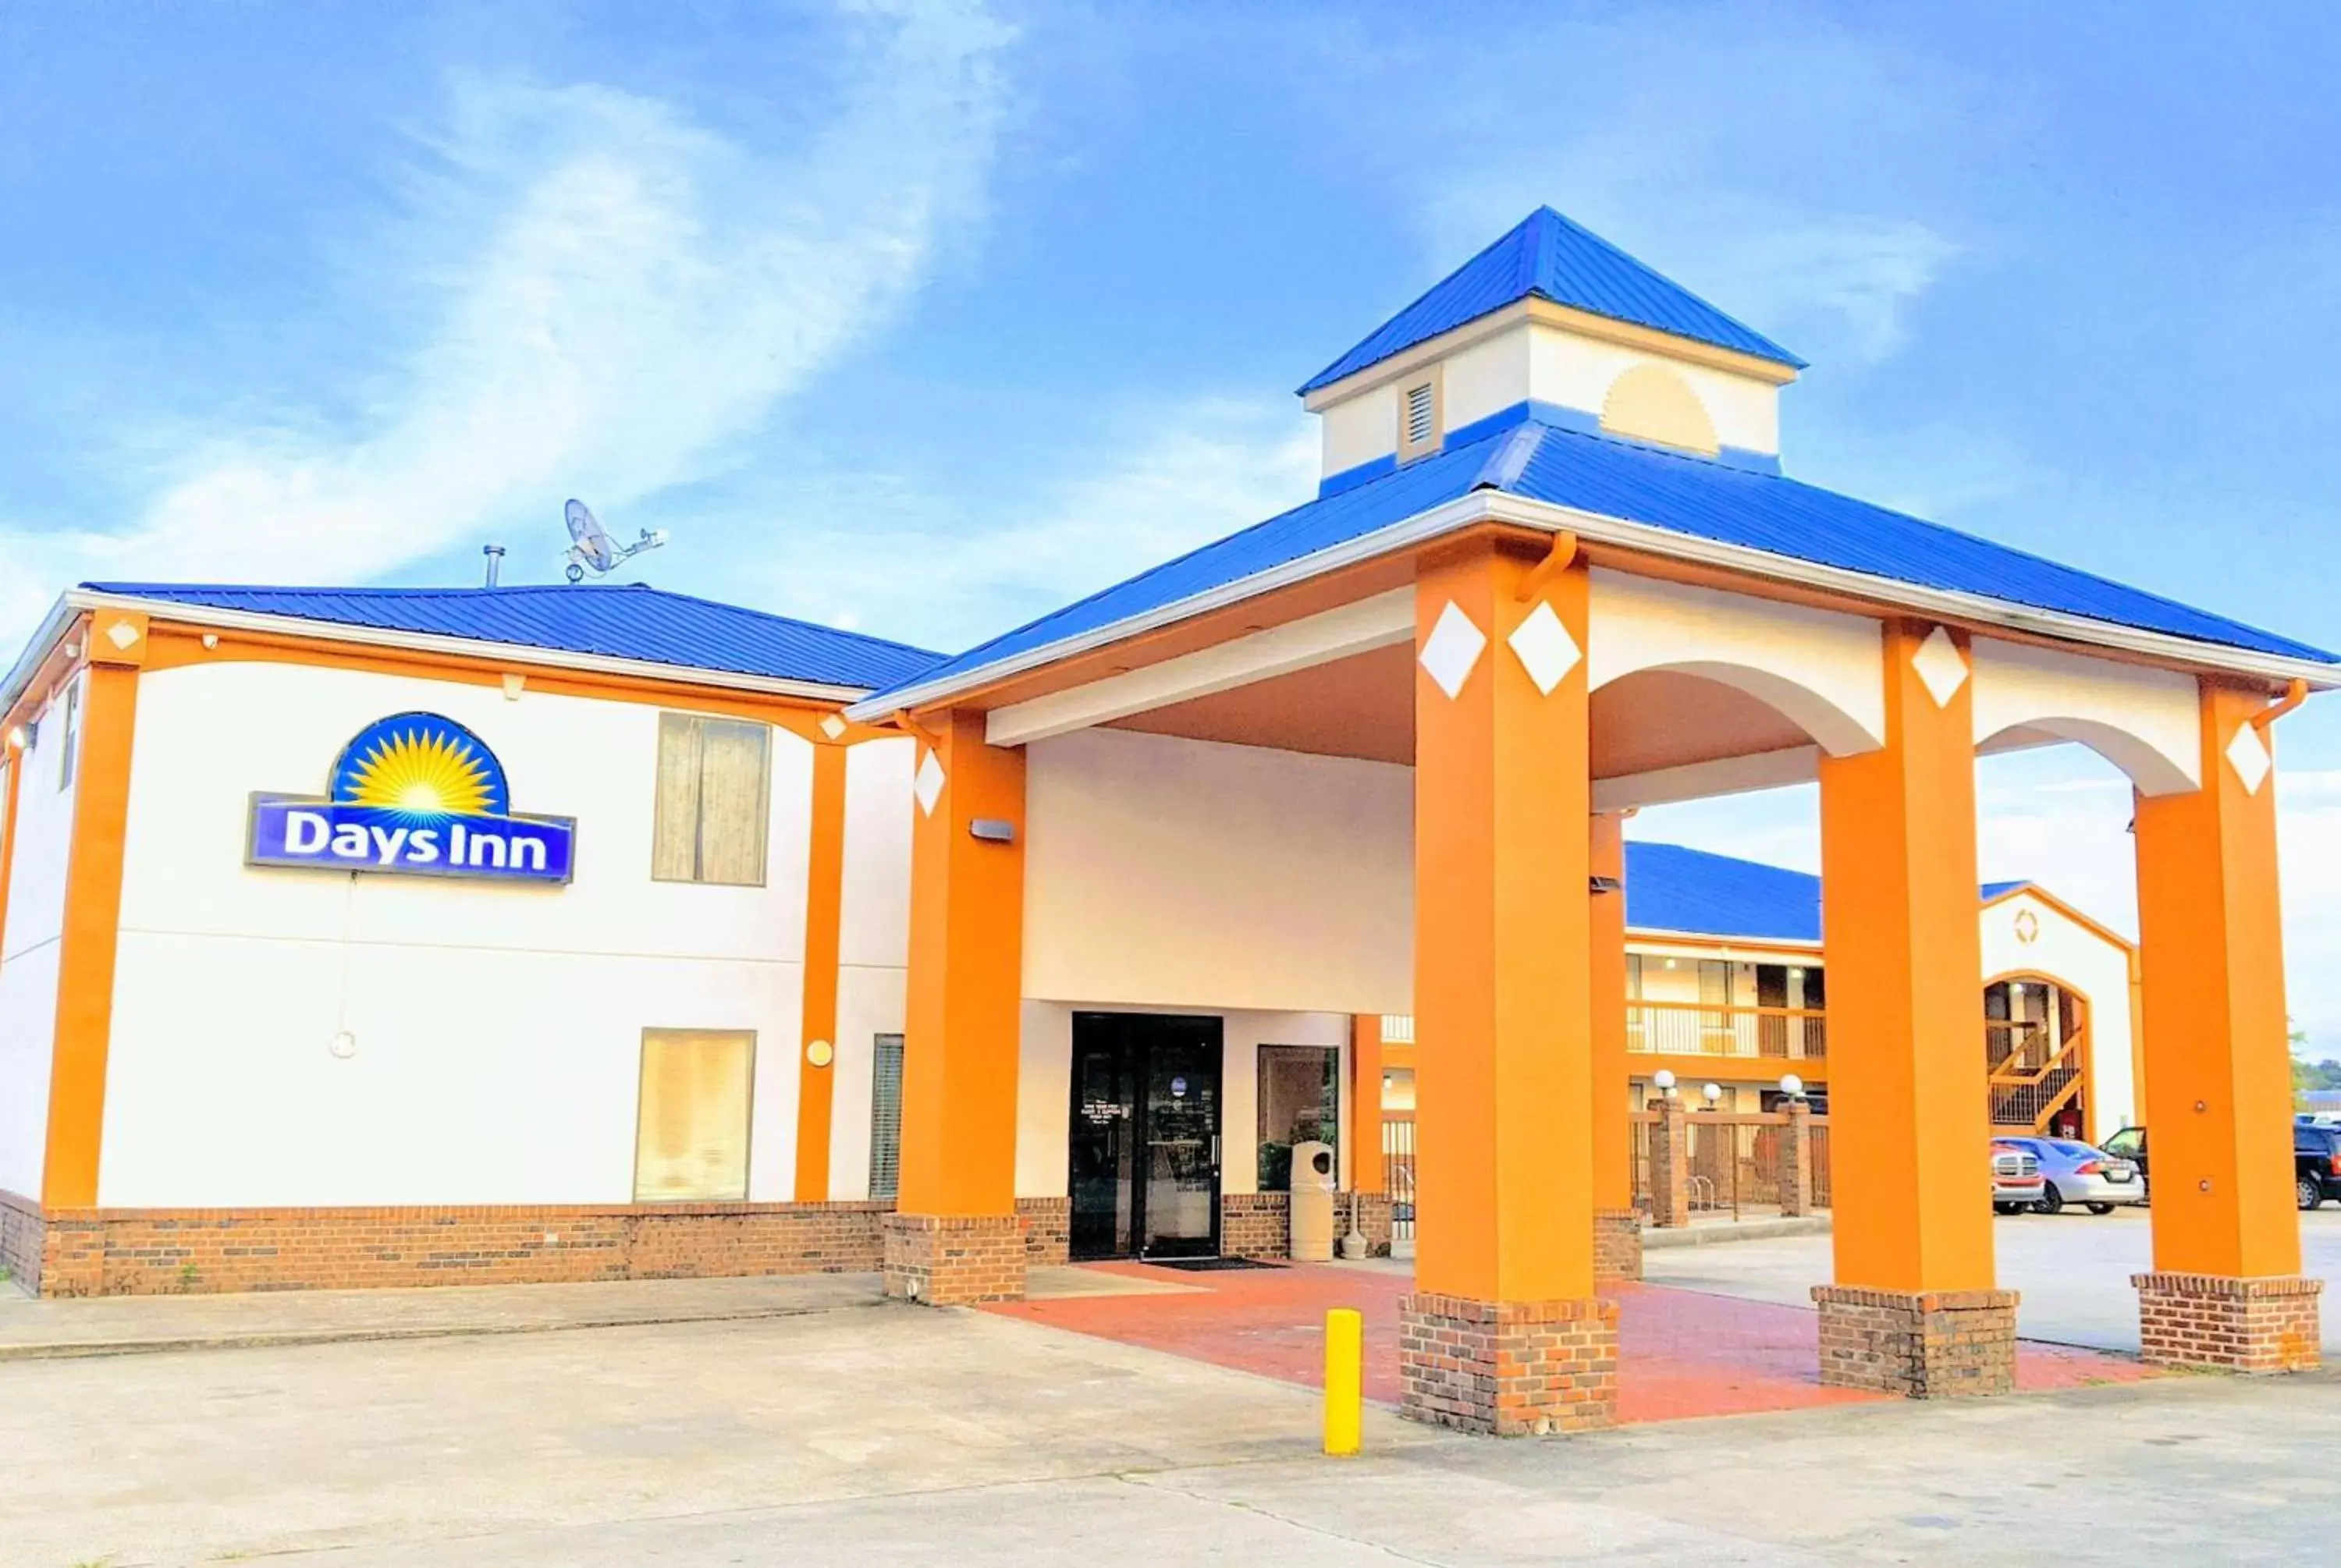 Property building in Days Inn by Wyndham Decatur Priceville I-65 Exit 334